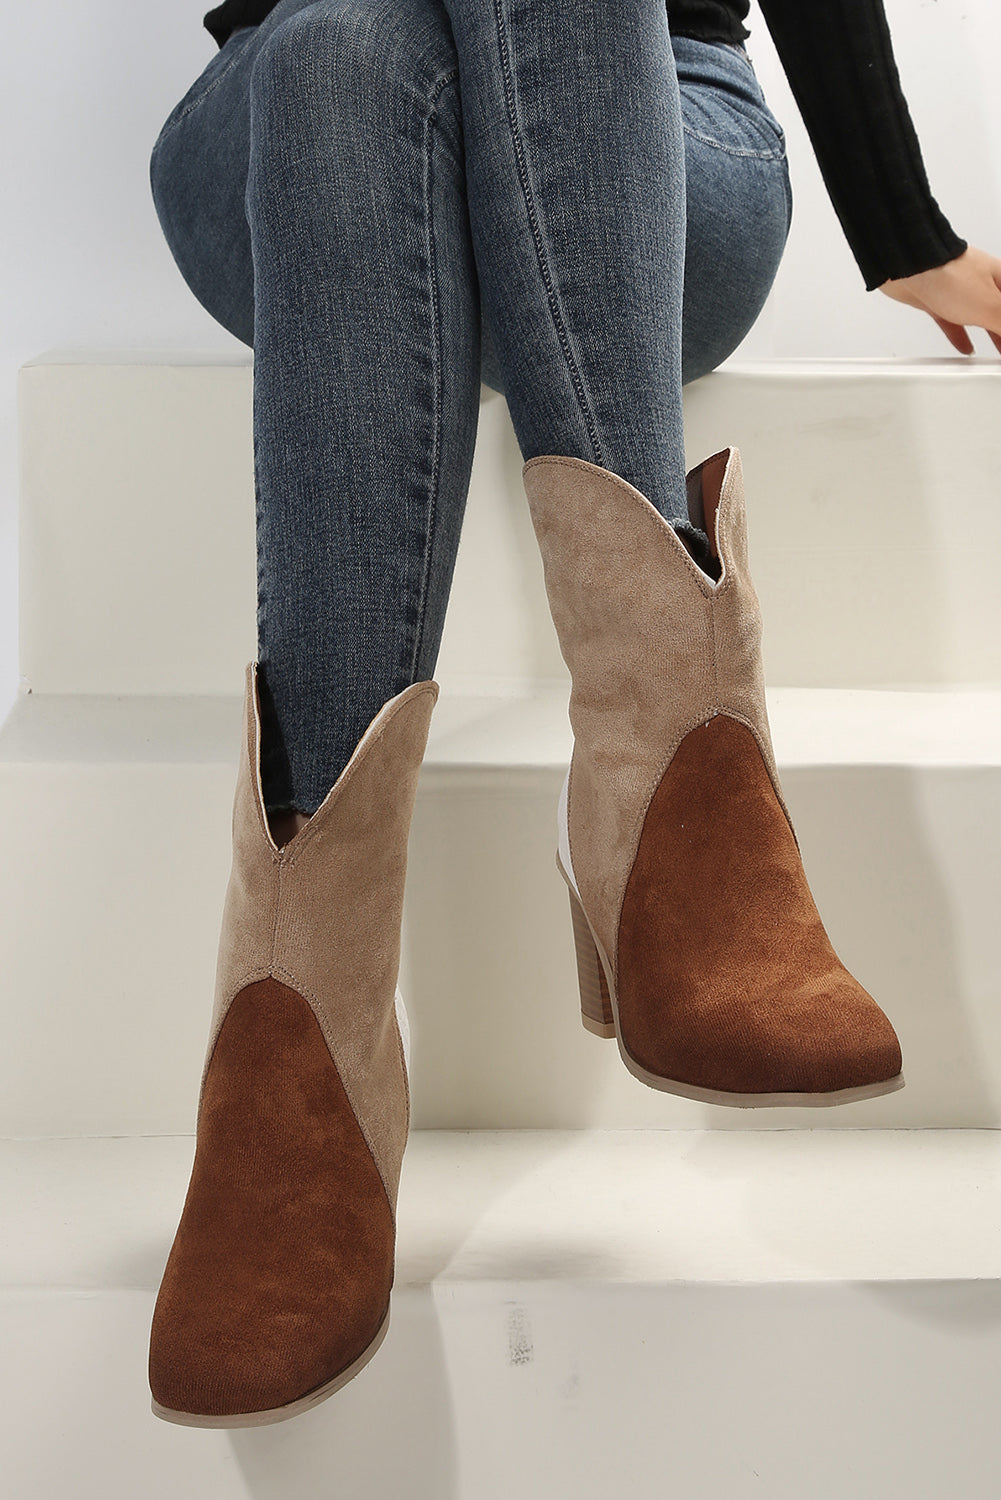 Chestnut 38 (7) 100%Polyester+100%TPR Colorblock Suede Heeled Ankle Booties - women's boots at TFC&H Co.